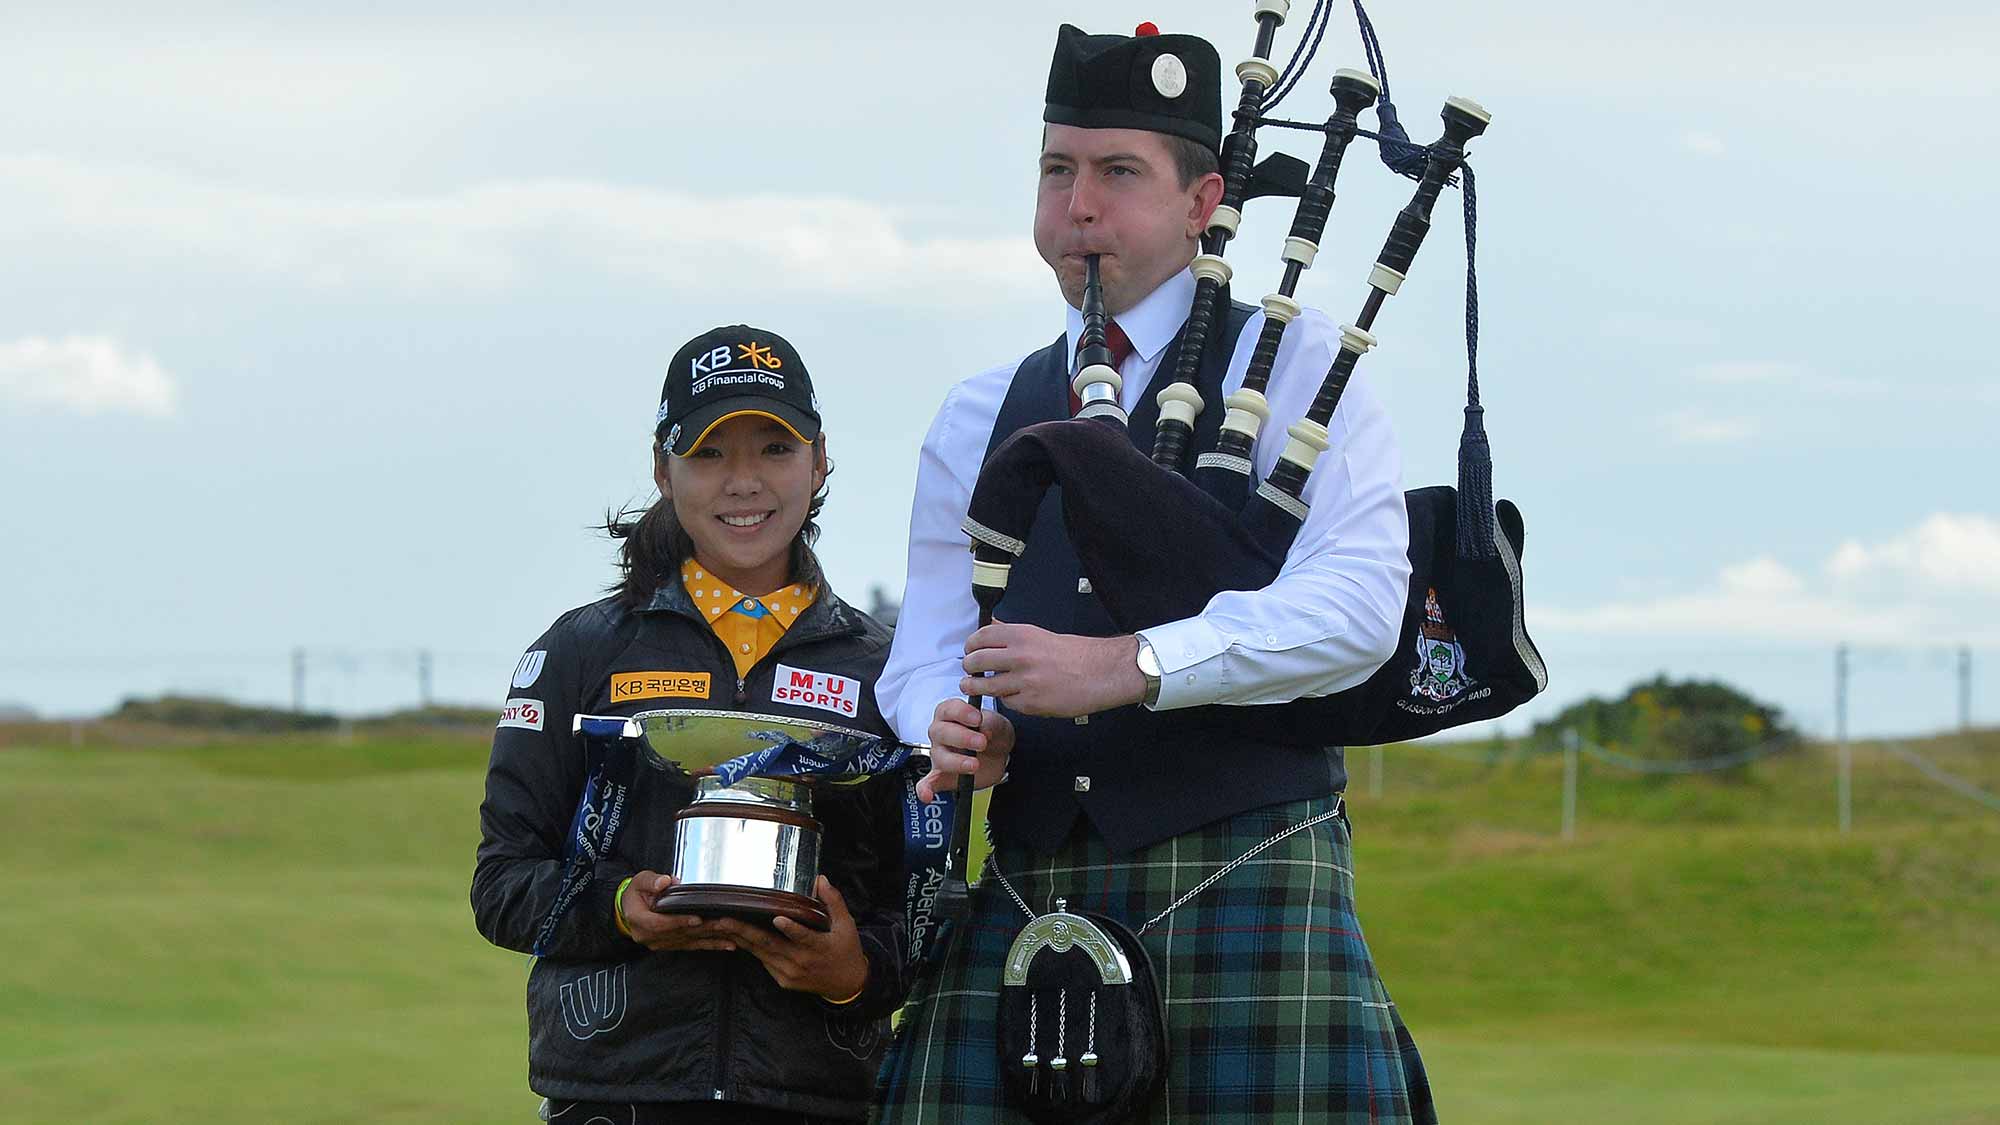 Mi Hyang Lee of Korea winner of the Aberdeen Asset Management Ladies Scottish Open poses for a photograph with a bag piper on the 18th green after the final round at Dundonald Links Golf Course 